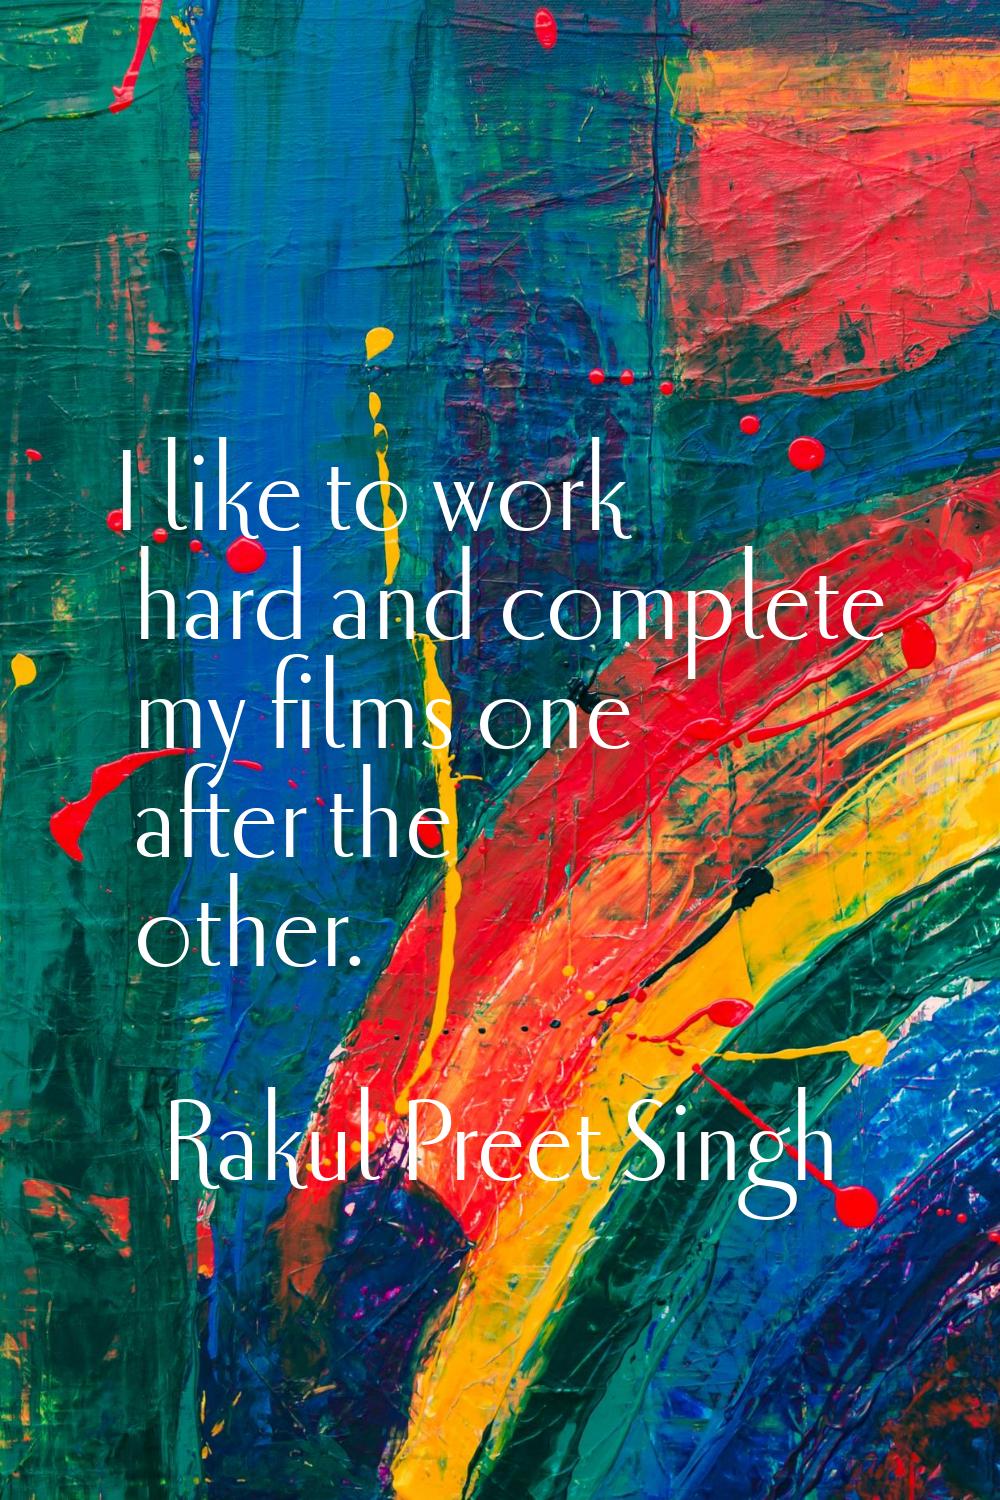 I like to work hard and complete my films one after the other.